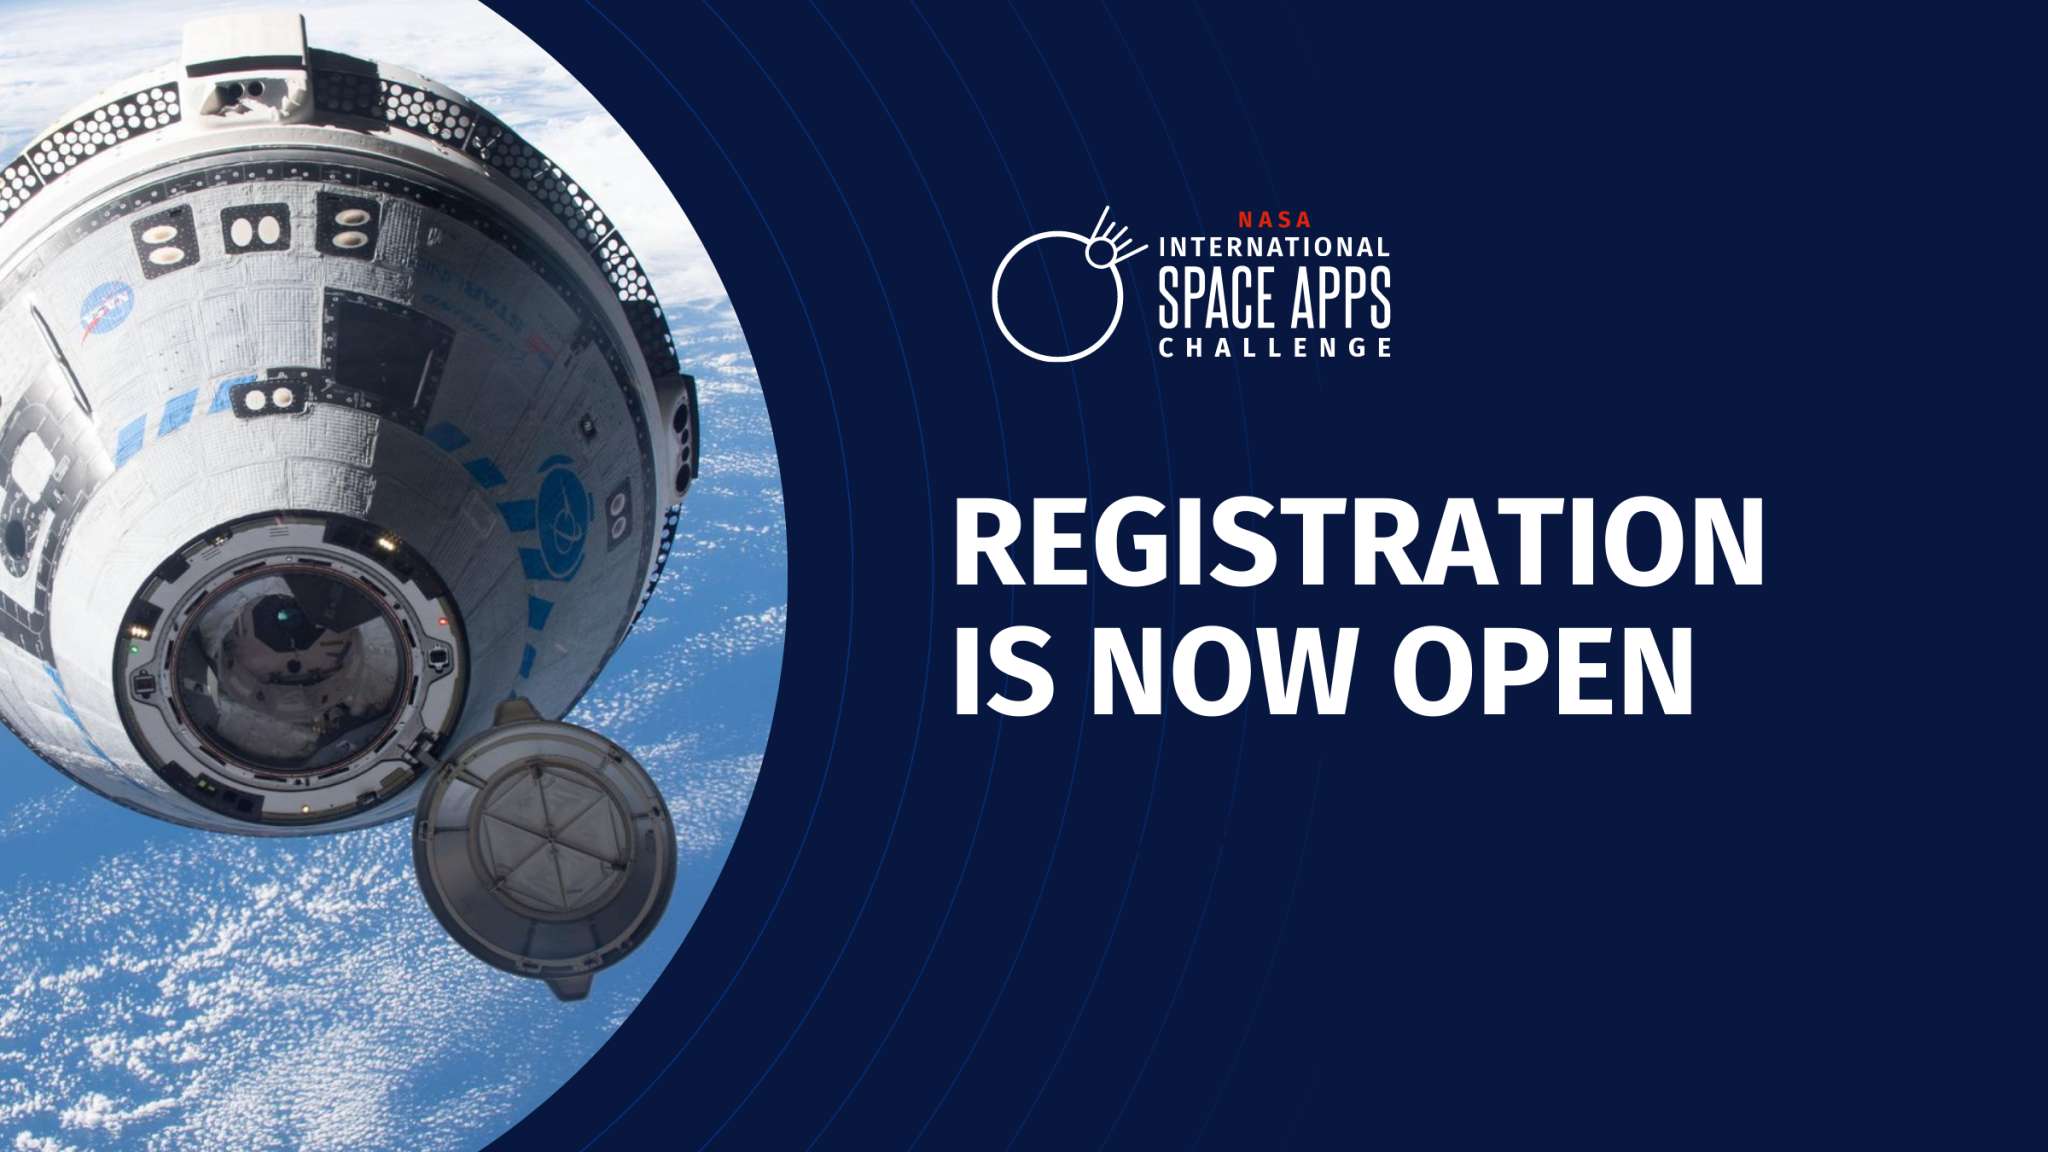 Participant registration for in-person and virtual events is now open for NASA's International Space Apps Challenge. Participants can register through Oct. 2, 2022.